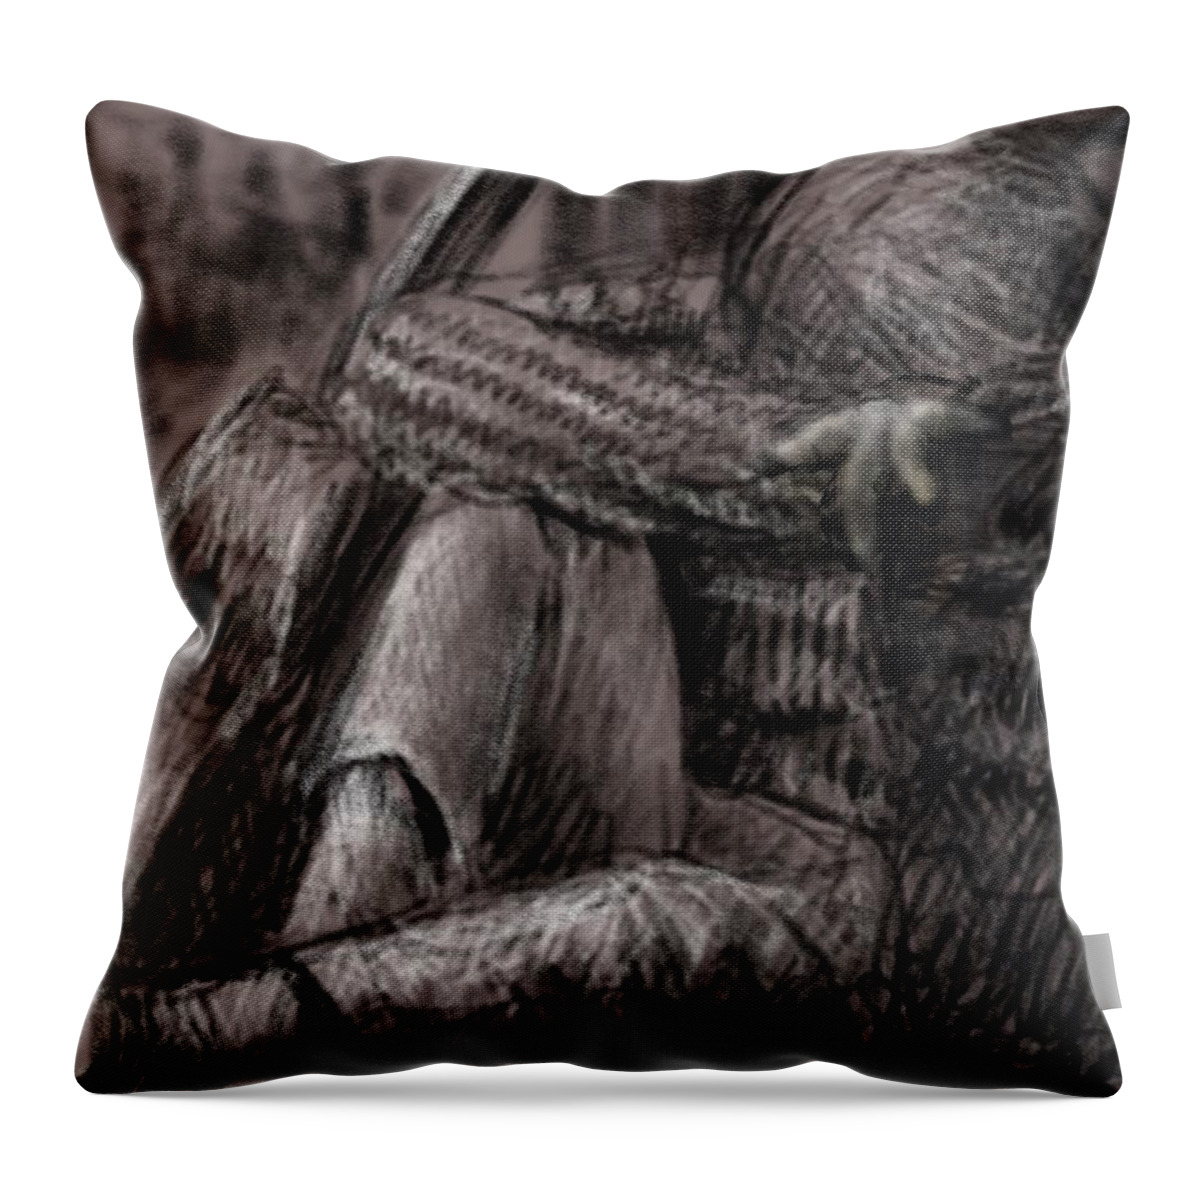 Sketch Throw Pillow featuring the drawing Canceled Flight by Larry Whitler